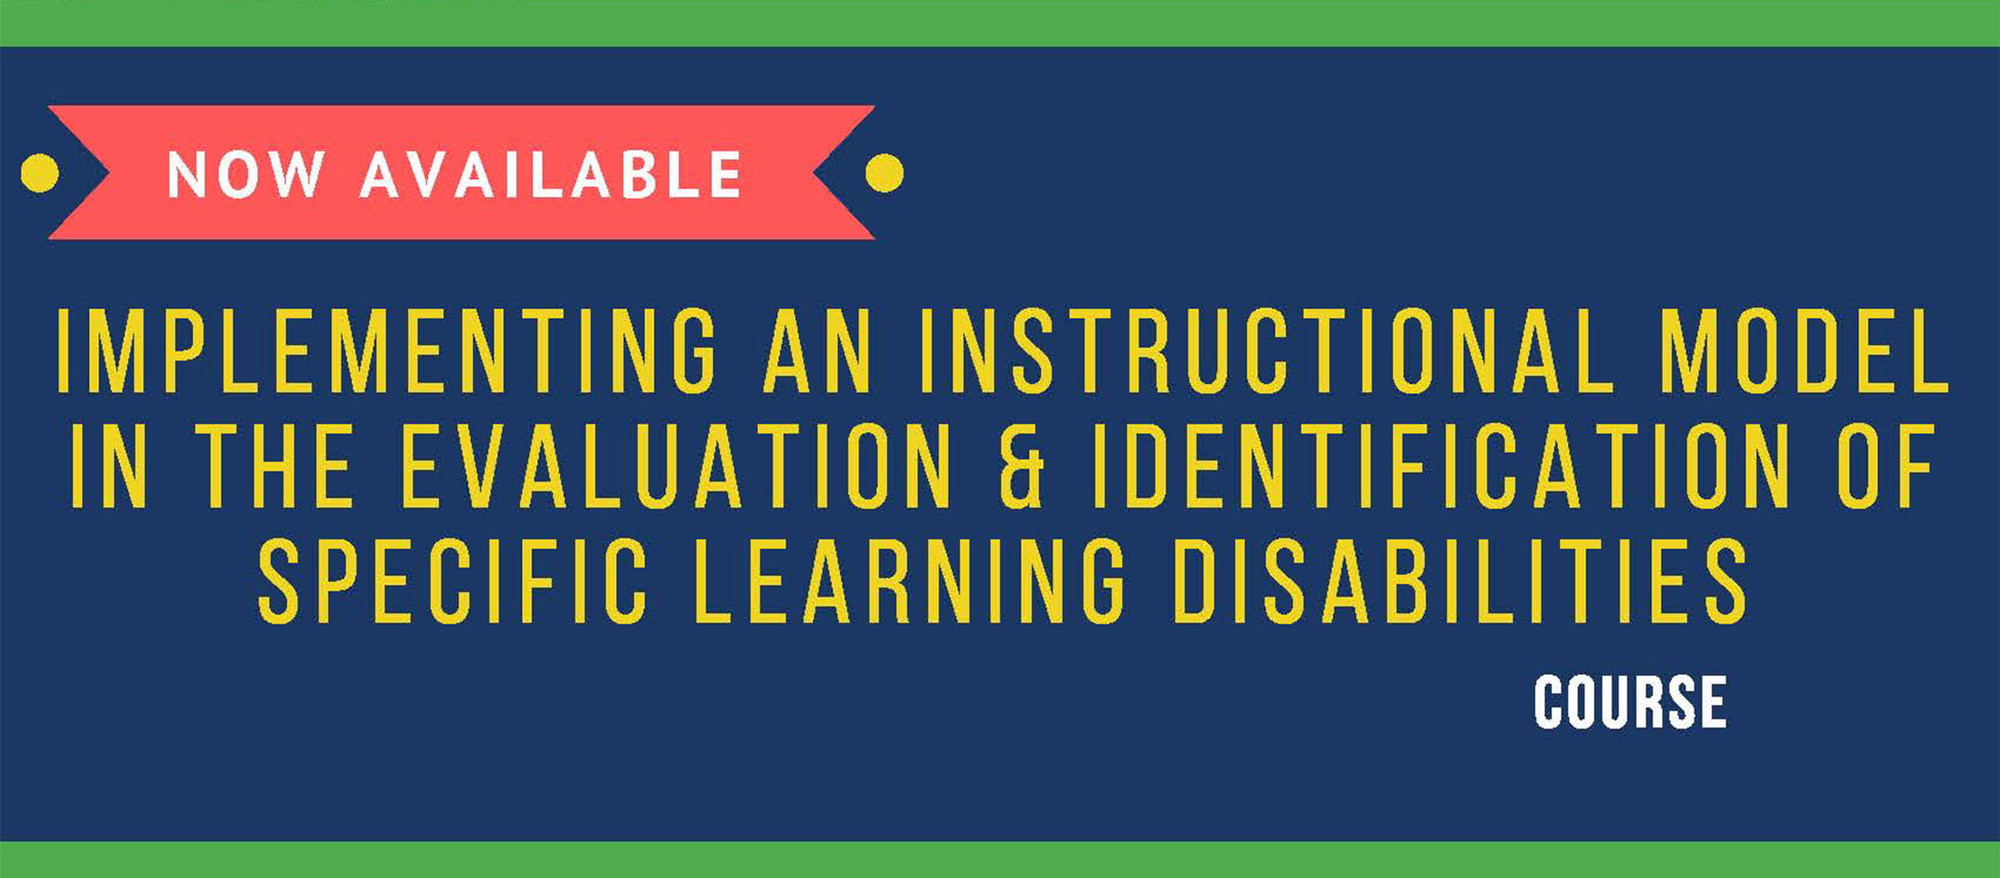 Implementing an Instructional Model on the Evaluation & Identification of Specific Learning Disabilities